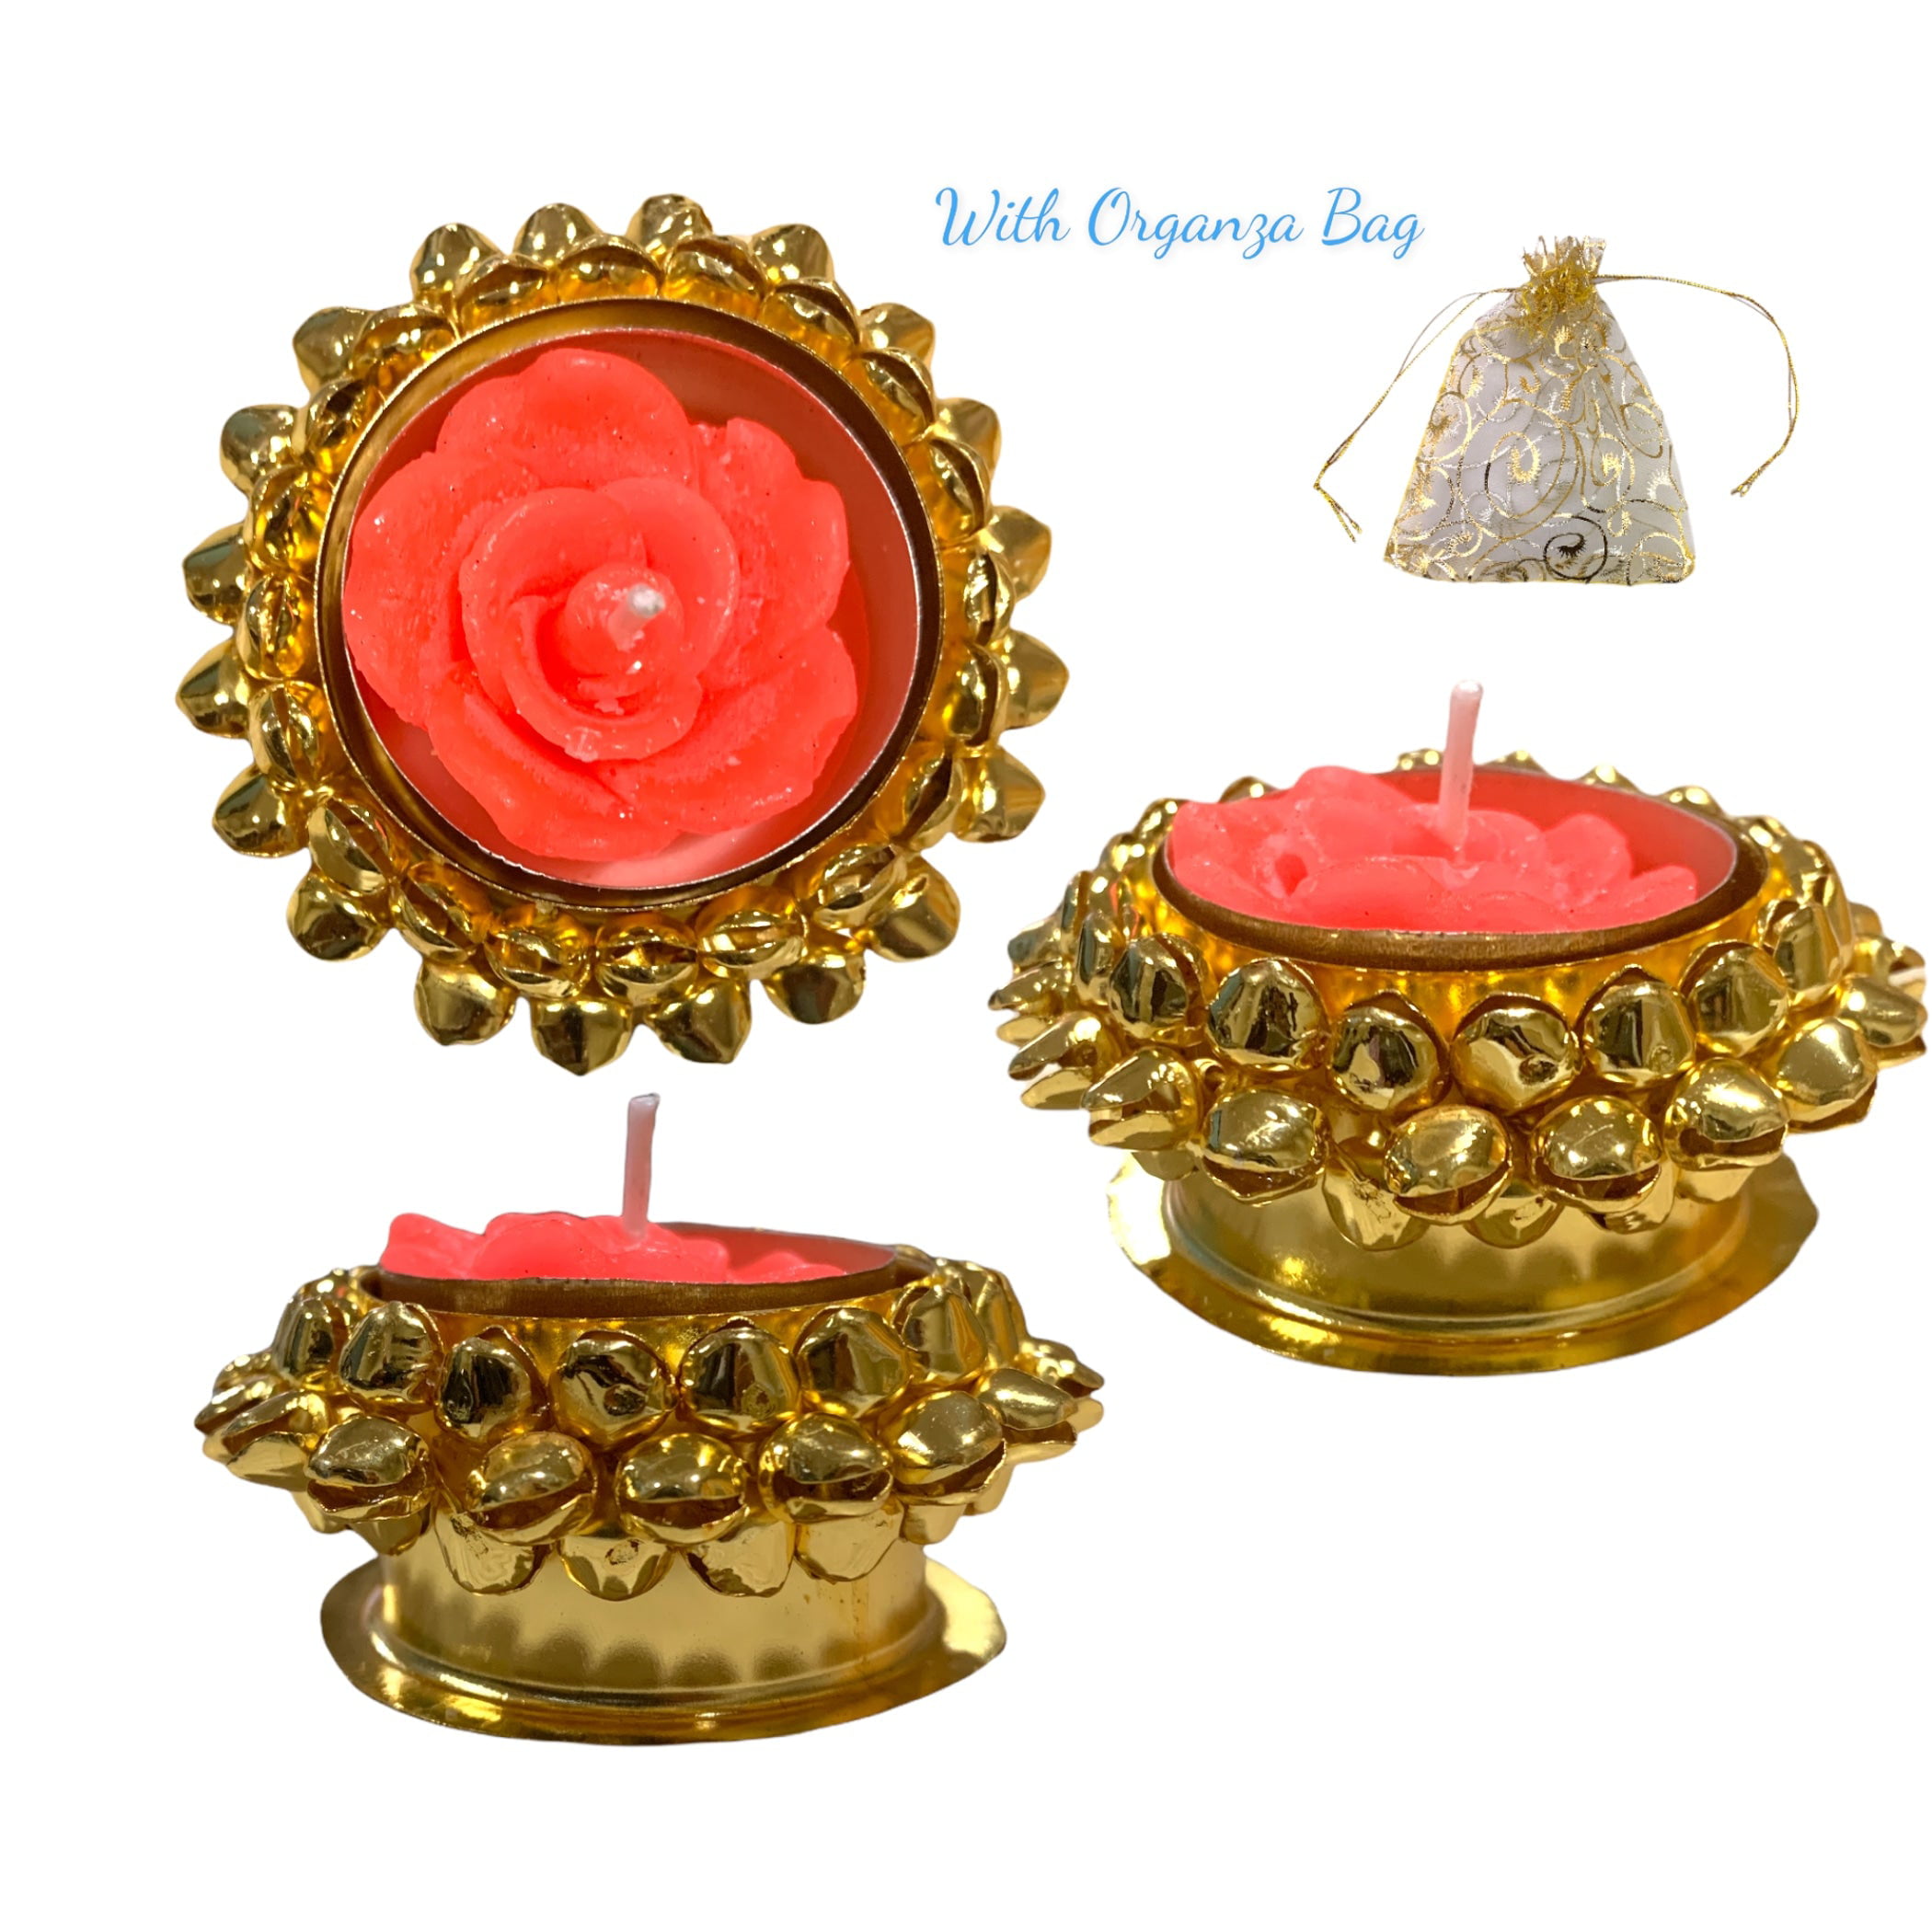 Diwali Decorations and Gift Items STORE INDYA Set of 5 Fancy Diwali Diyas with tealight Holder Decorated with Roses and Greeting Card Home Decor for Diwali Indian Diwali Diya 